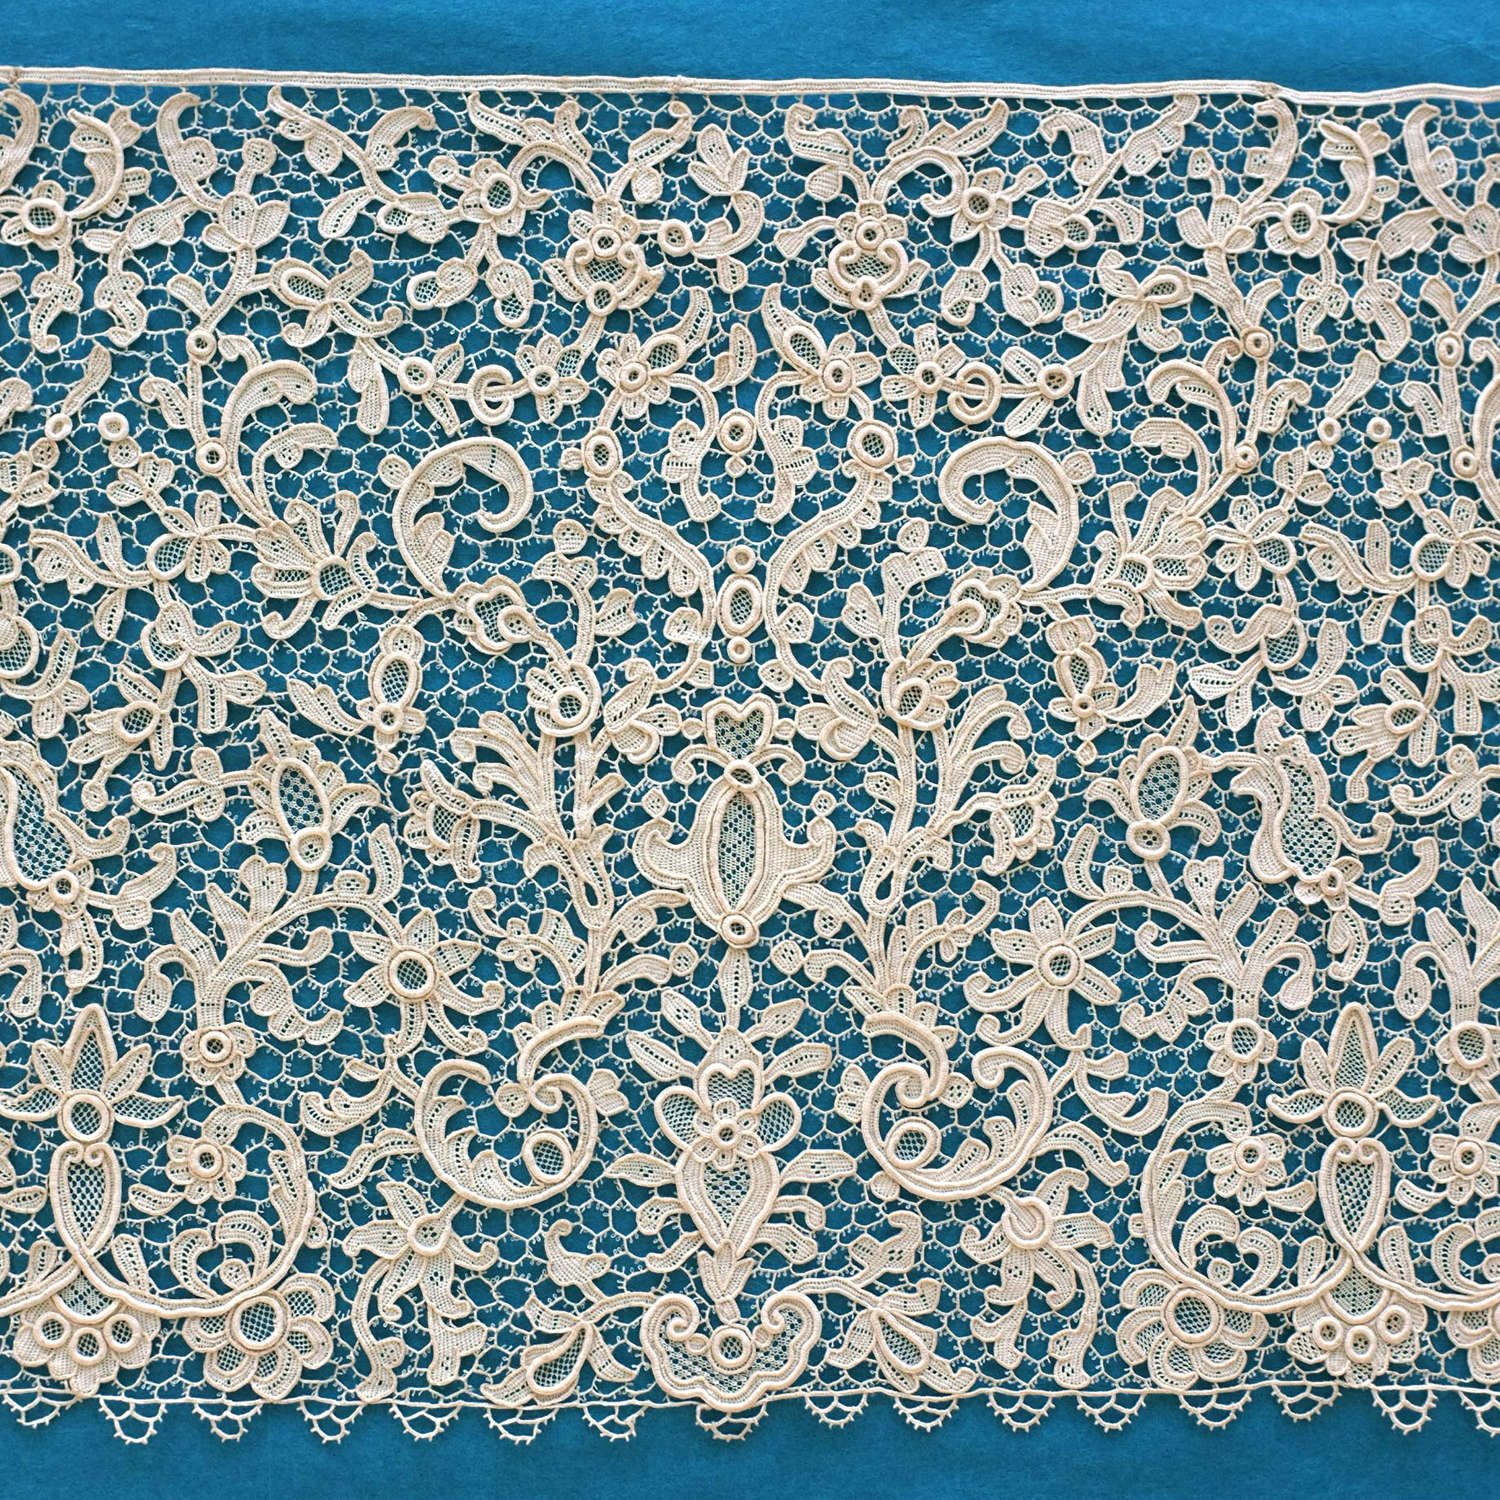 Antique French Needlepoint Lace Border circa 1890